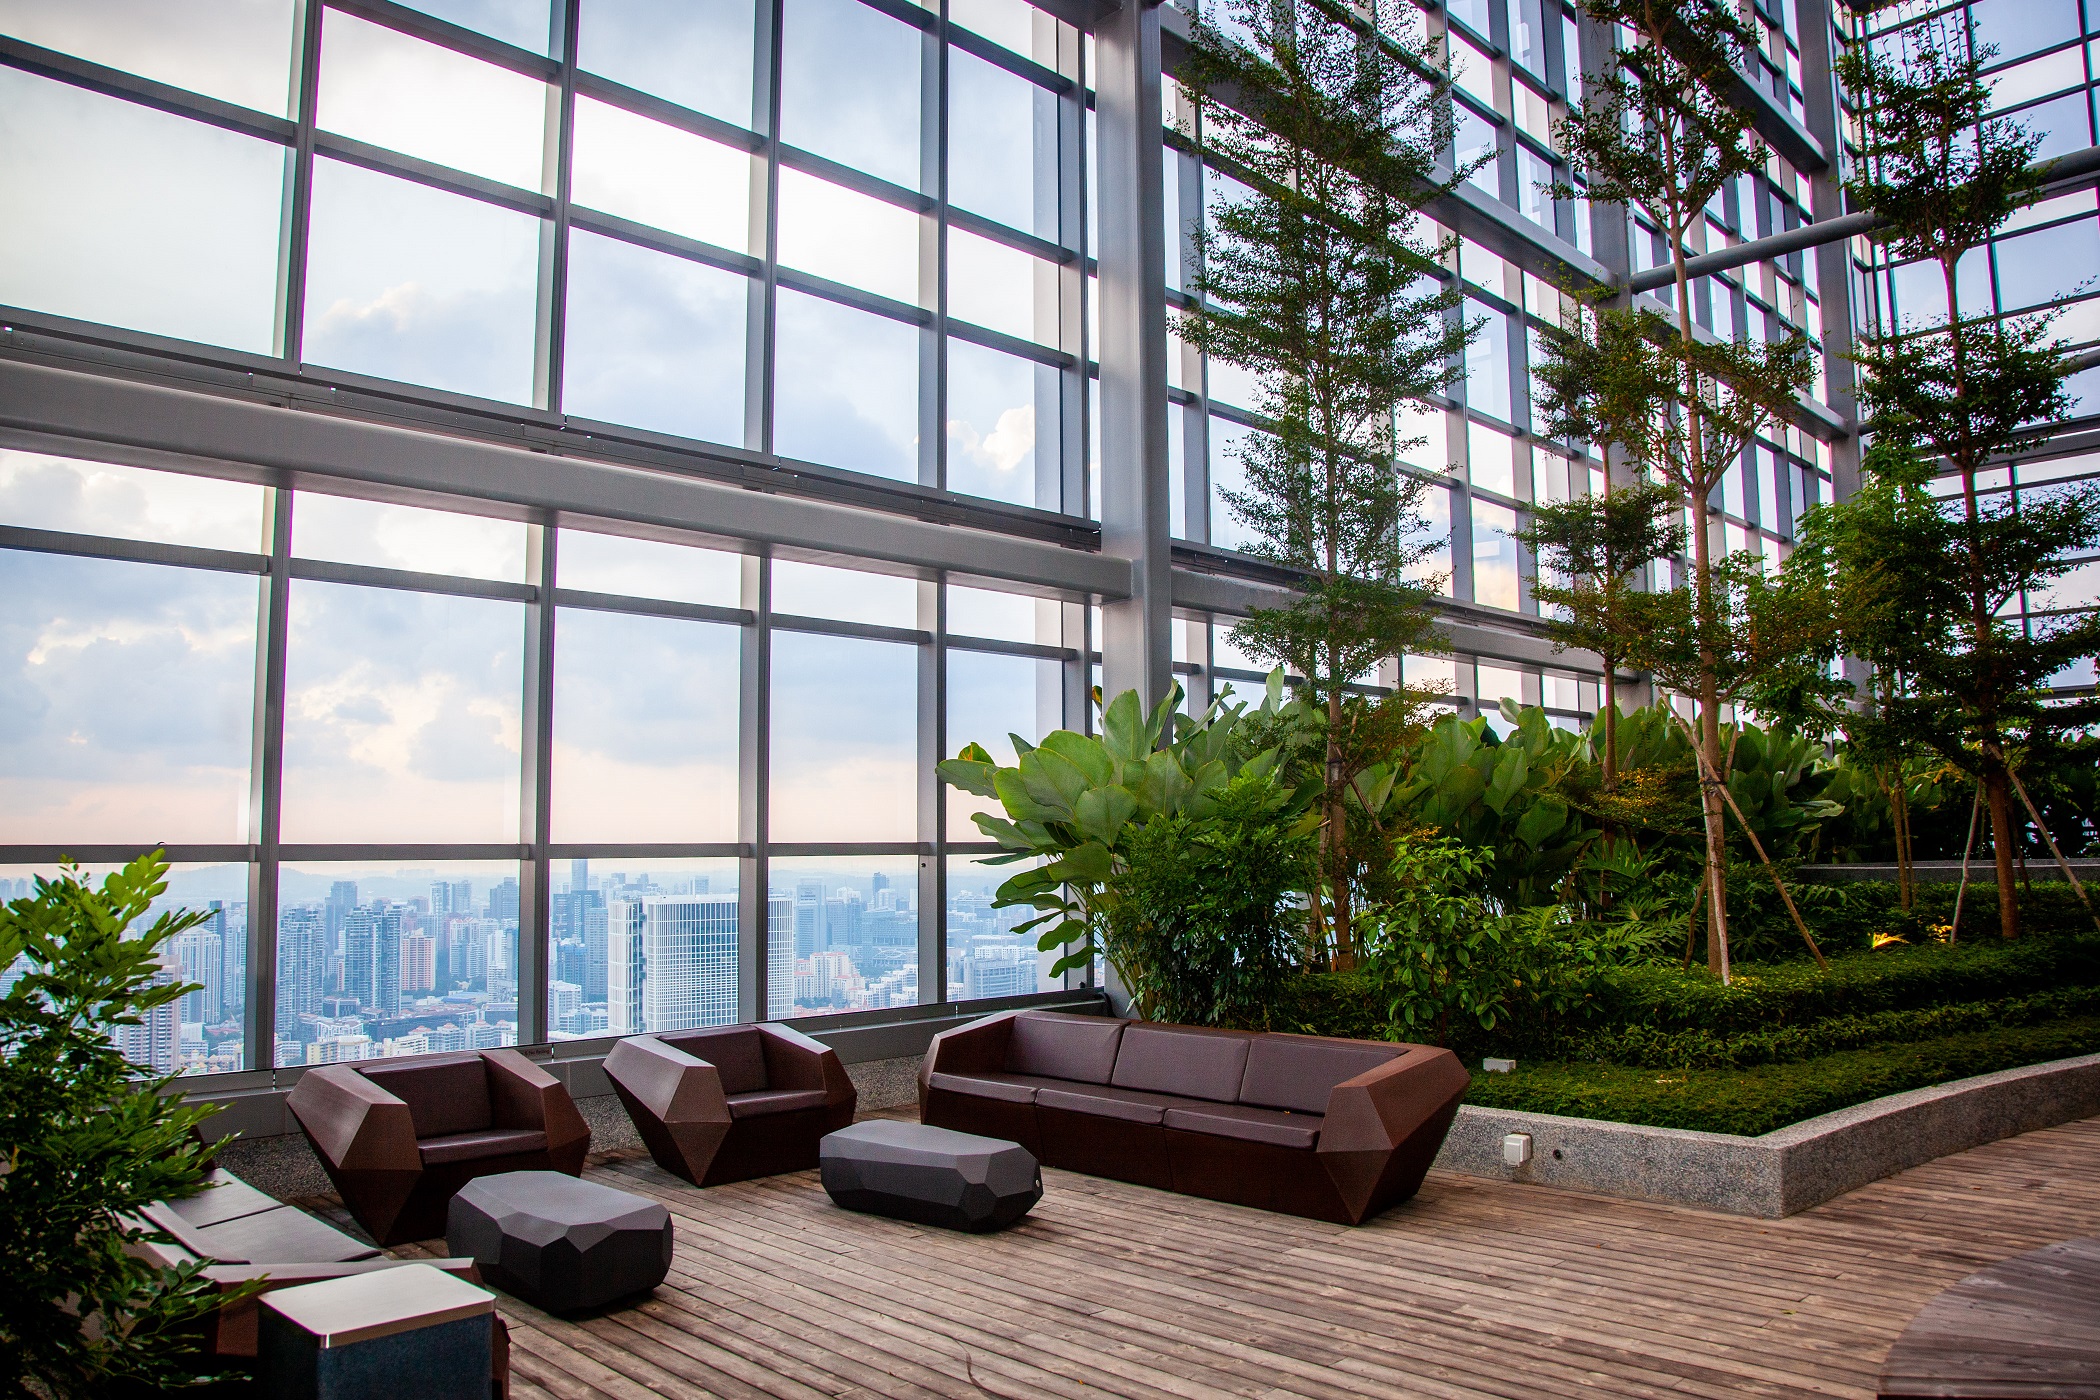 Frasers Tower, our premium Grade A CBD commercial development in Singapore has been awarded the Green Mark Platinum by Singapore’s Building and Construction Authority for its environmentally-friendly features. Featured here is The Sky Garden, one of four community zones that tenants can utilise for engagement activities.